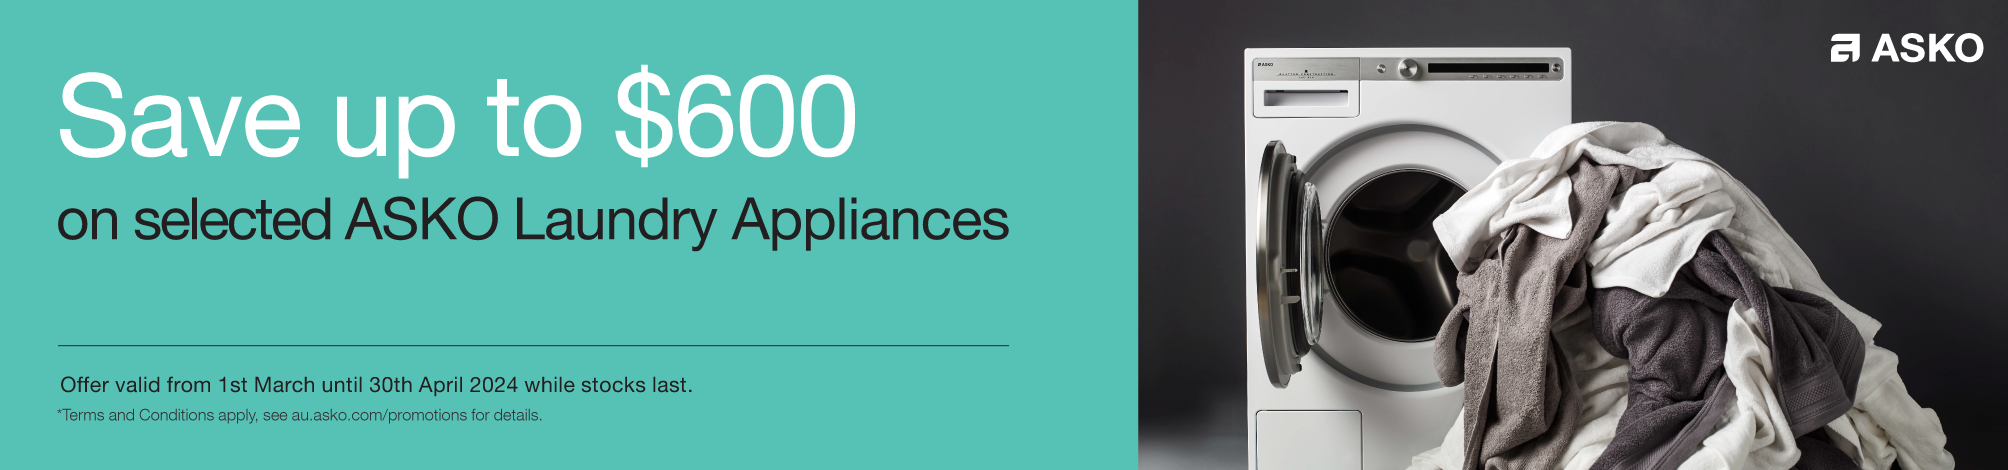 Save Up To $600 On Selected ASKO Laundry Appliances